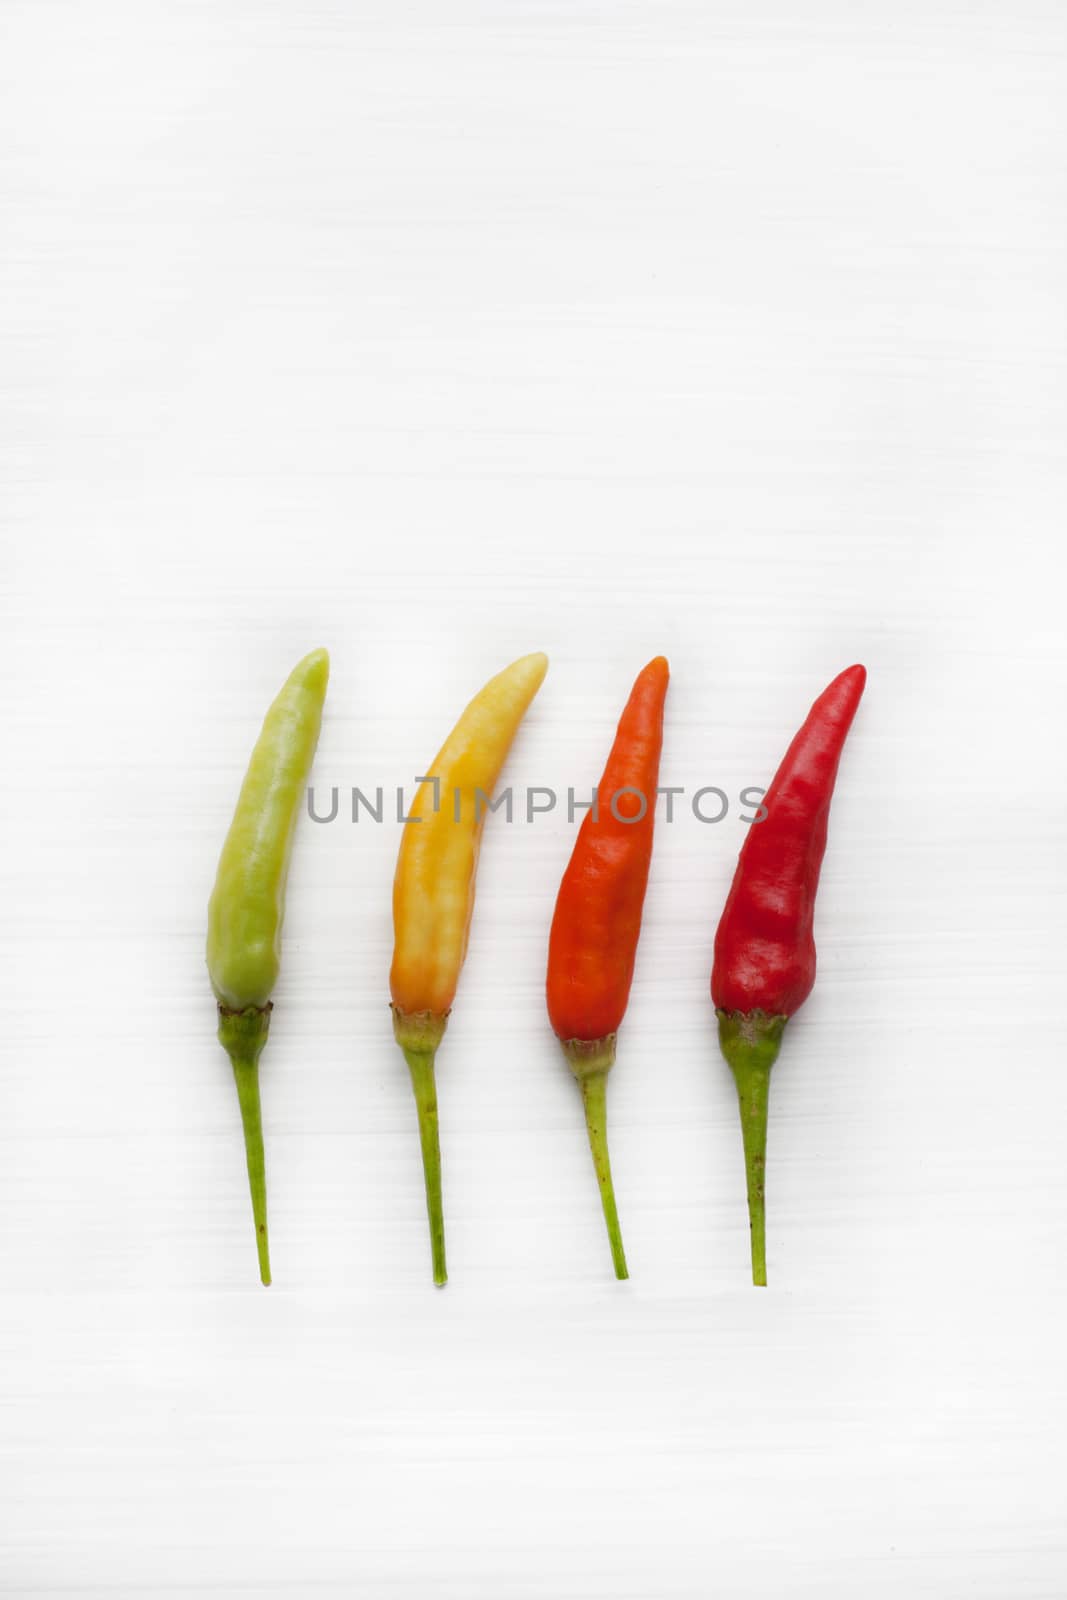 Chili peppers on white.